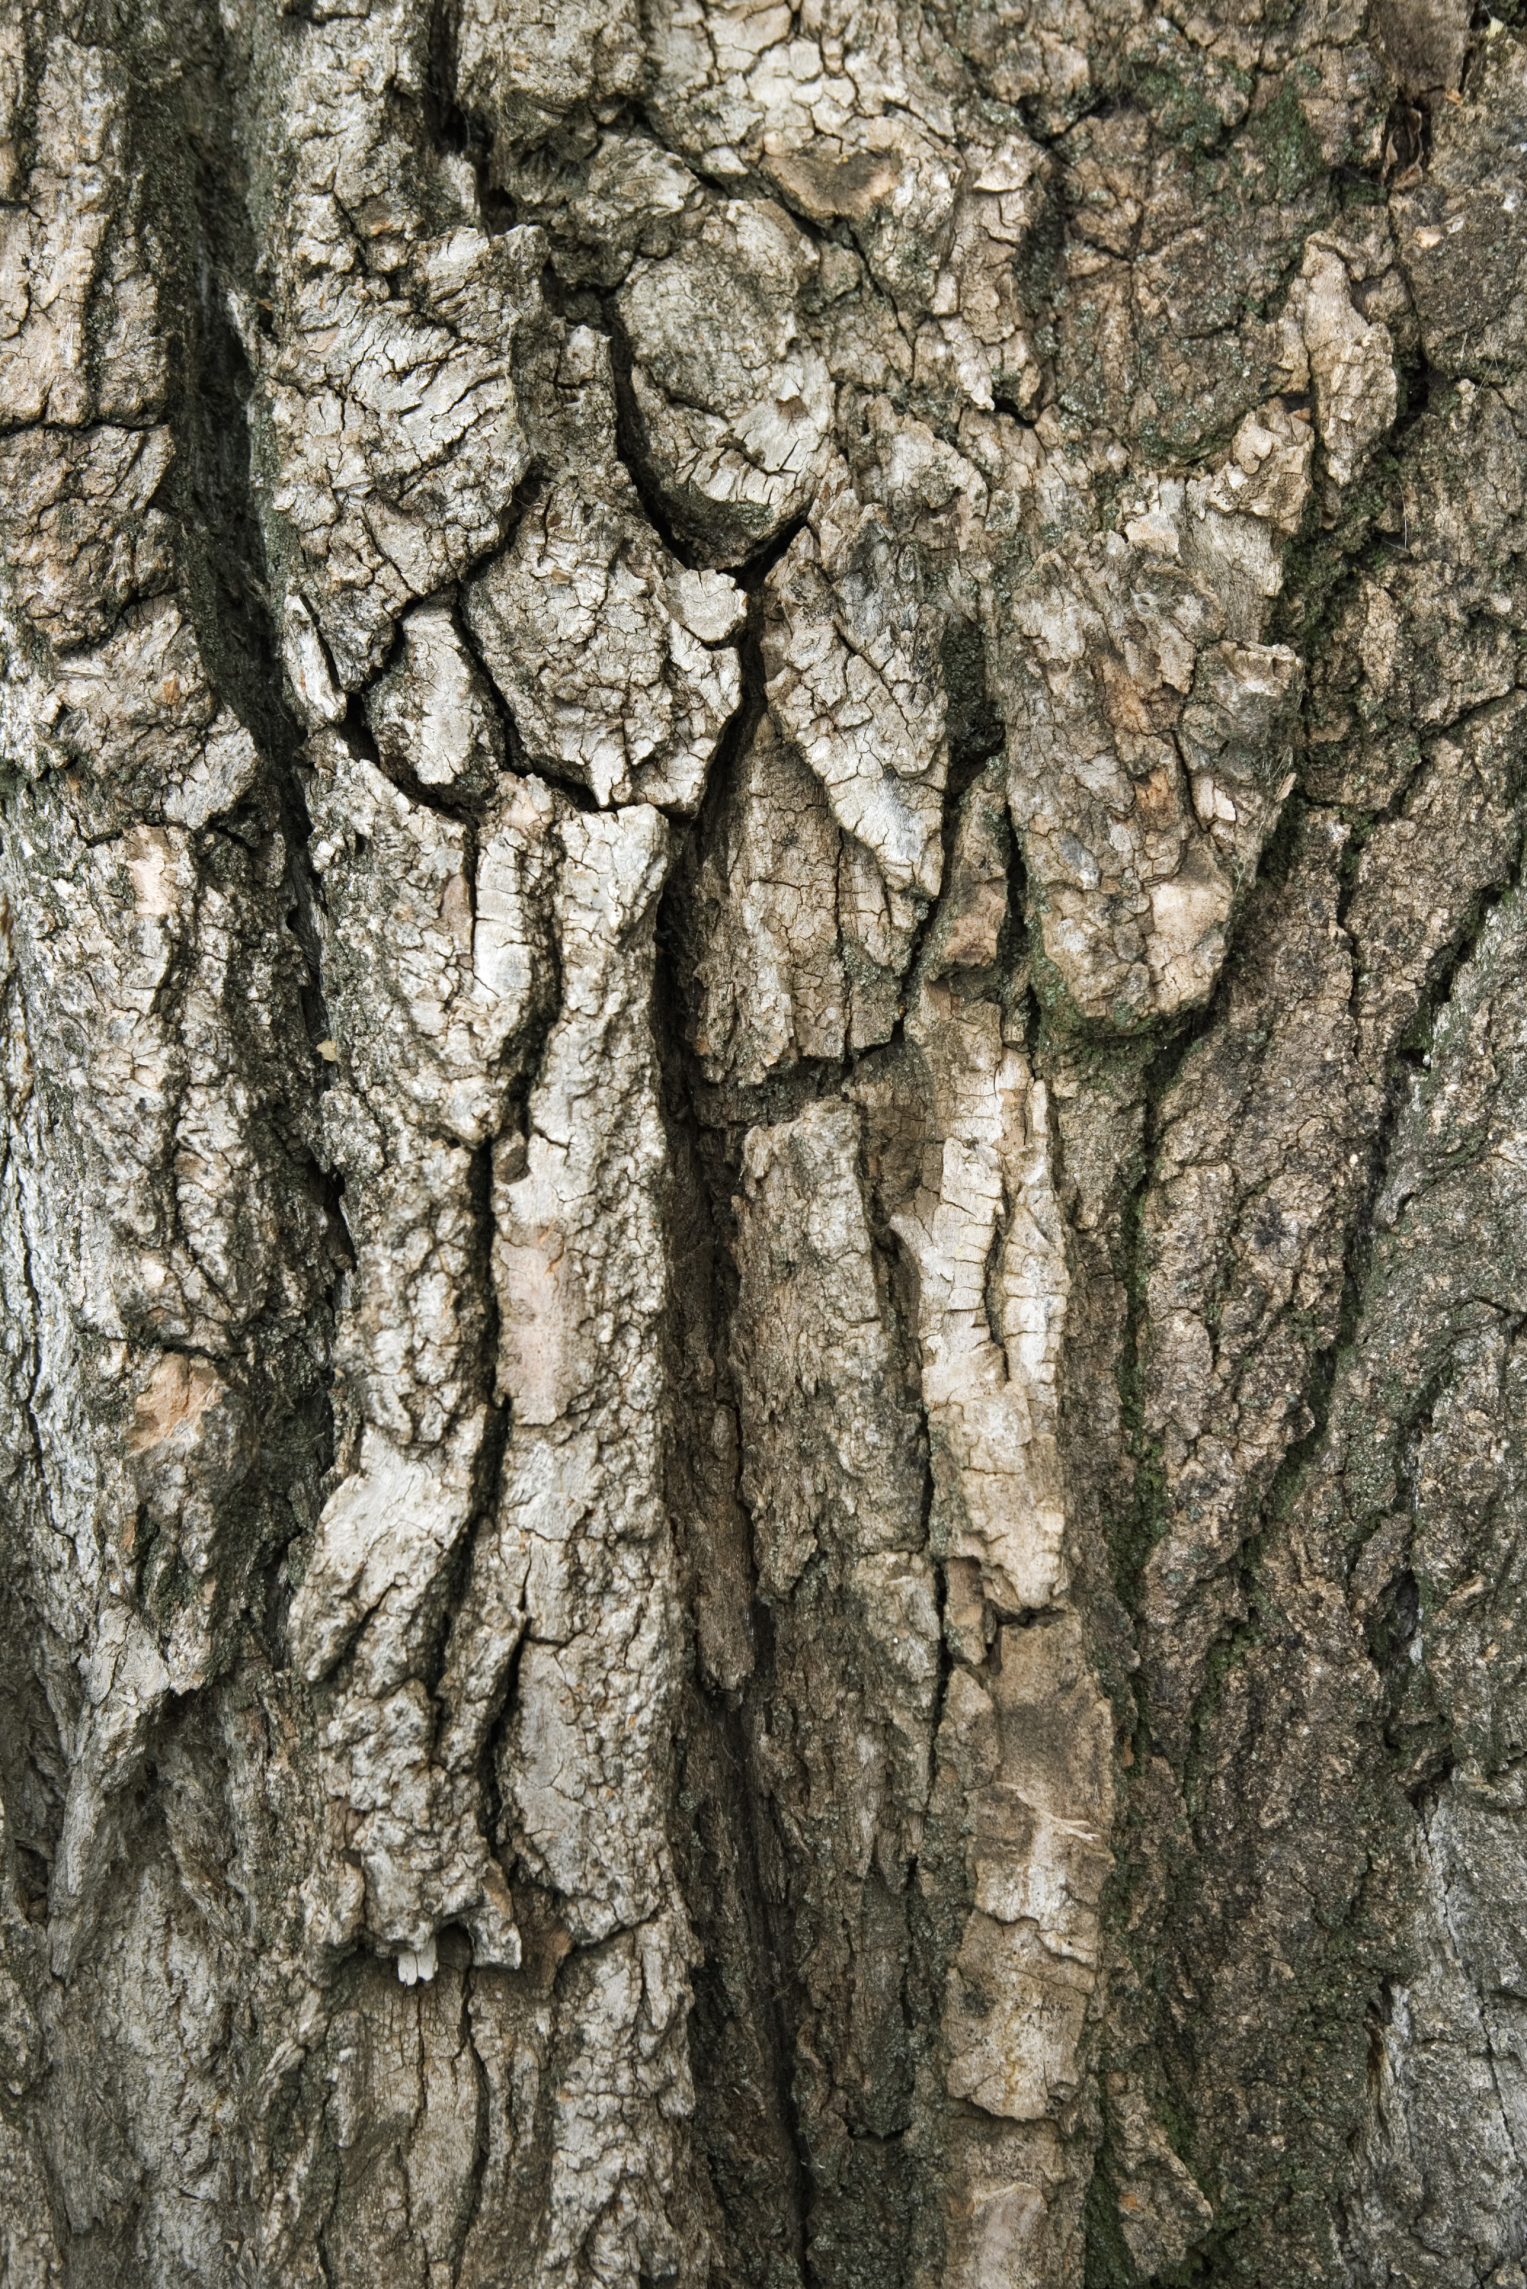 Tree-bark thickness indicates fire-resistance in a hotter future